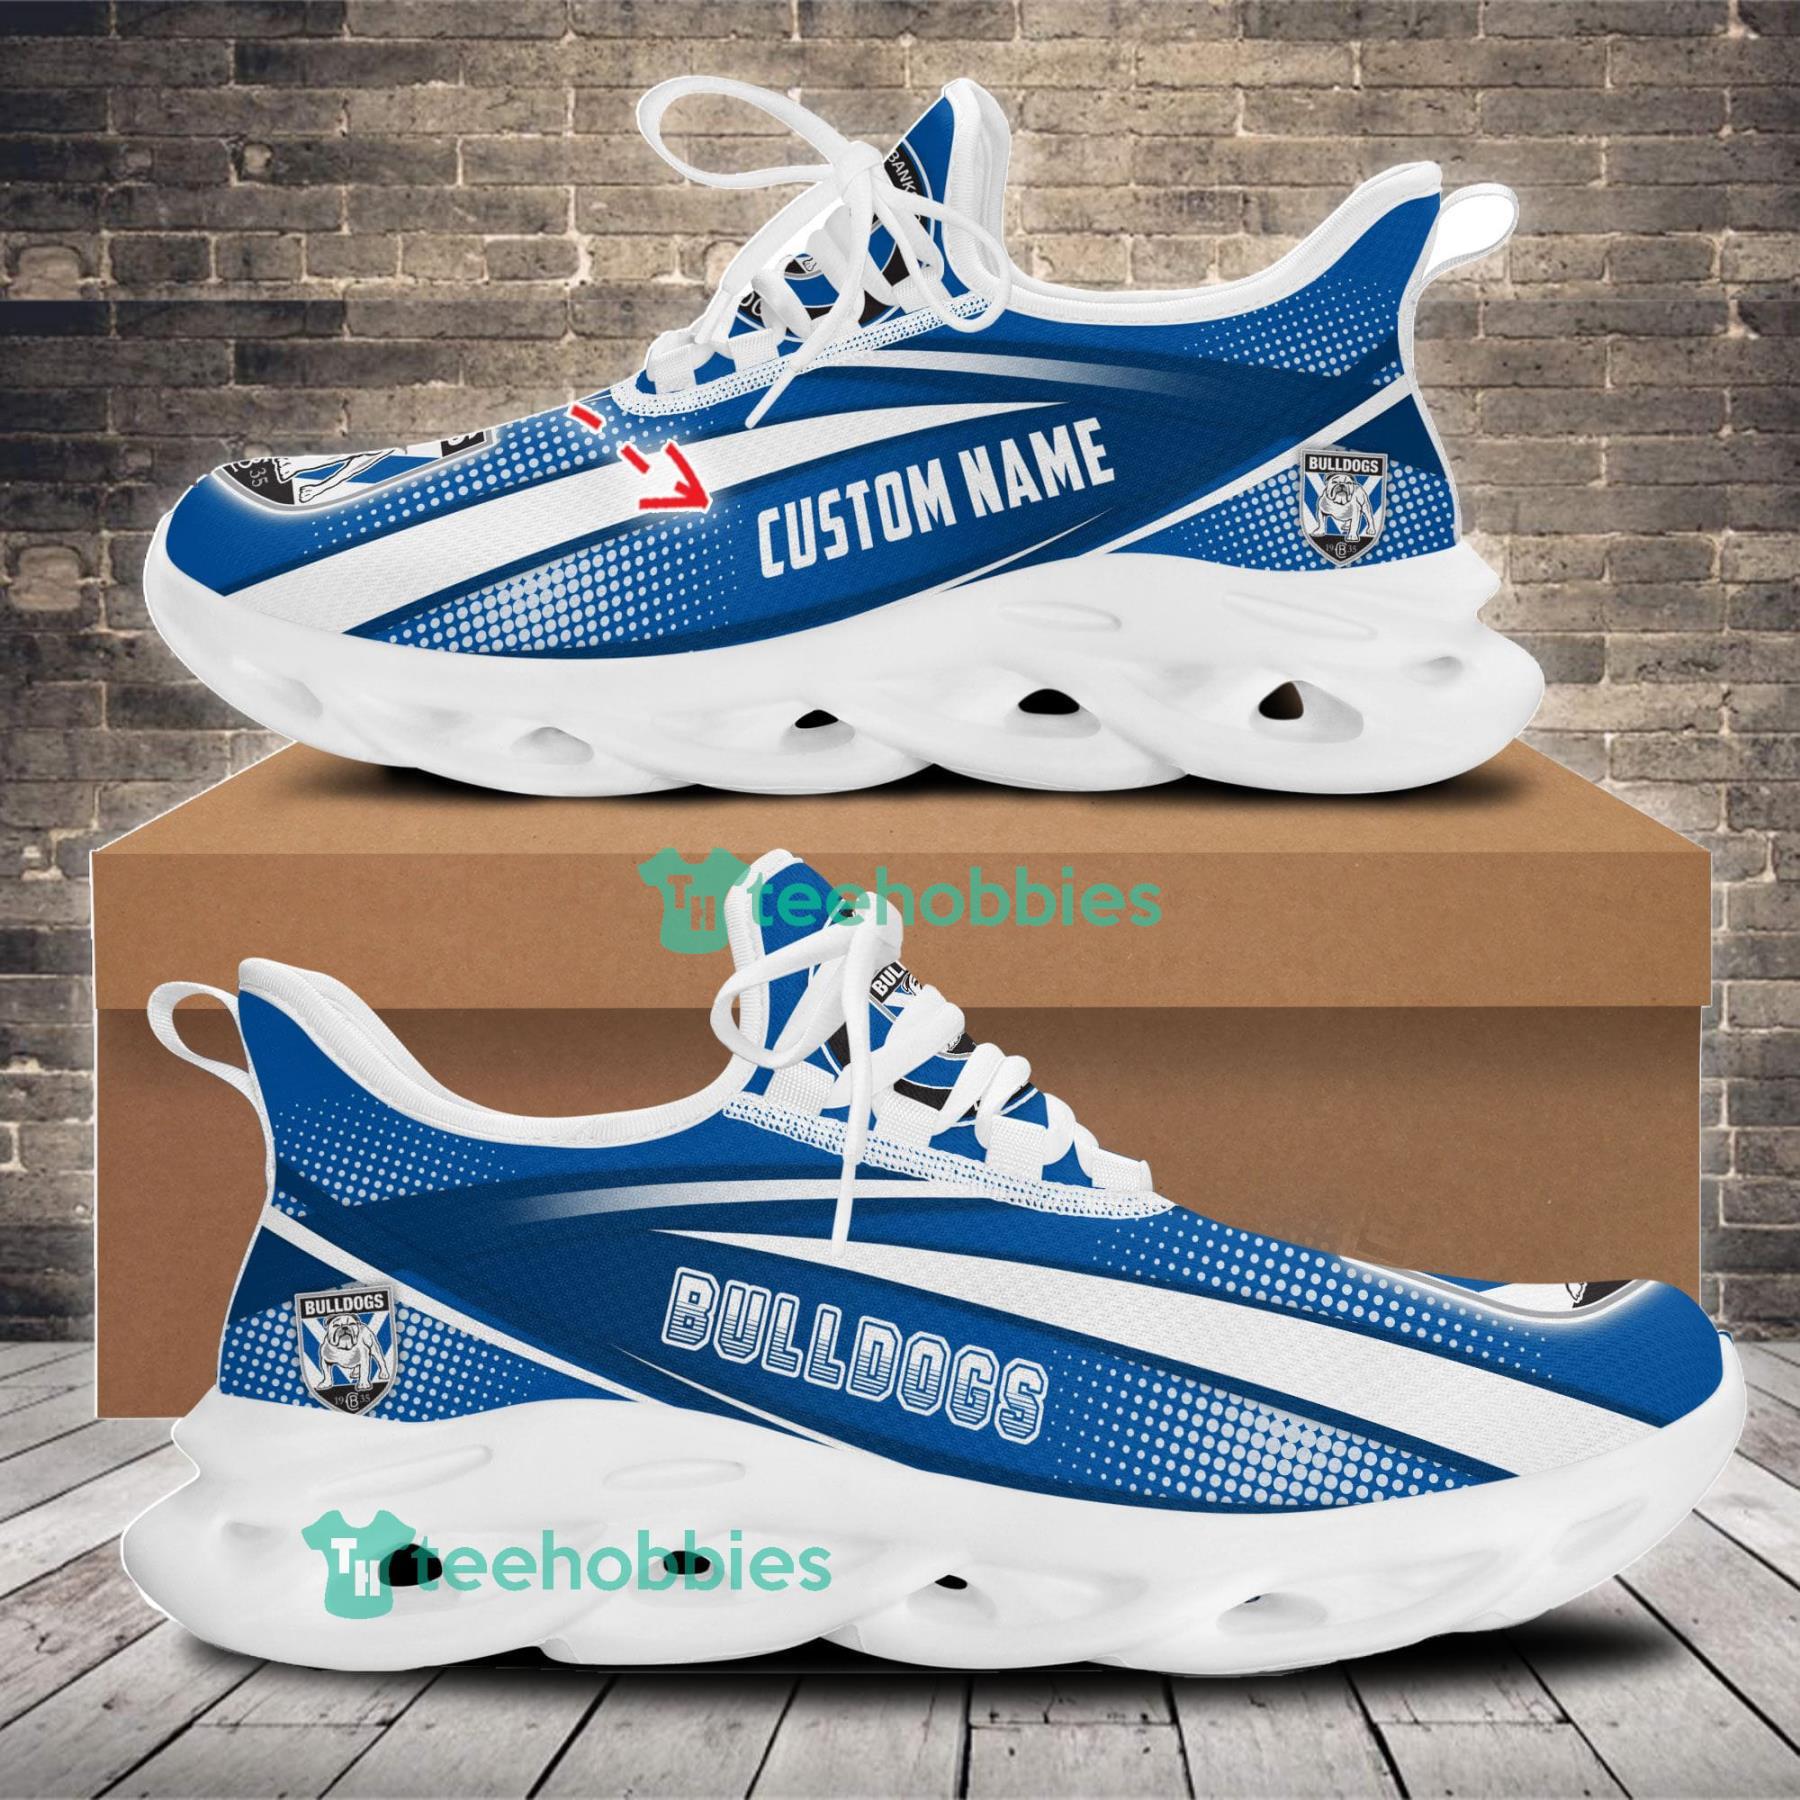 Canterbury-Bankstown Bulldogs Sneakers Max Soul Shoes For Men And Women NRL Custom Name For Fans Product Photo 1